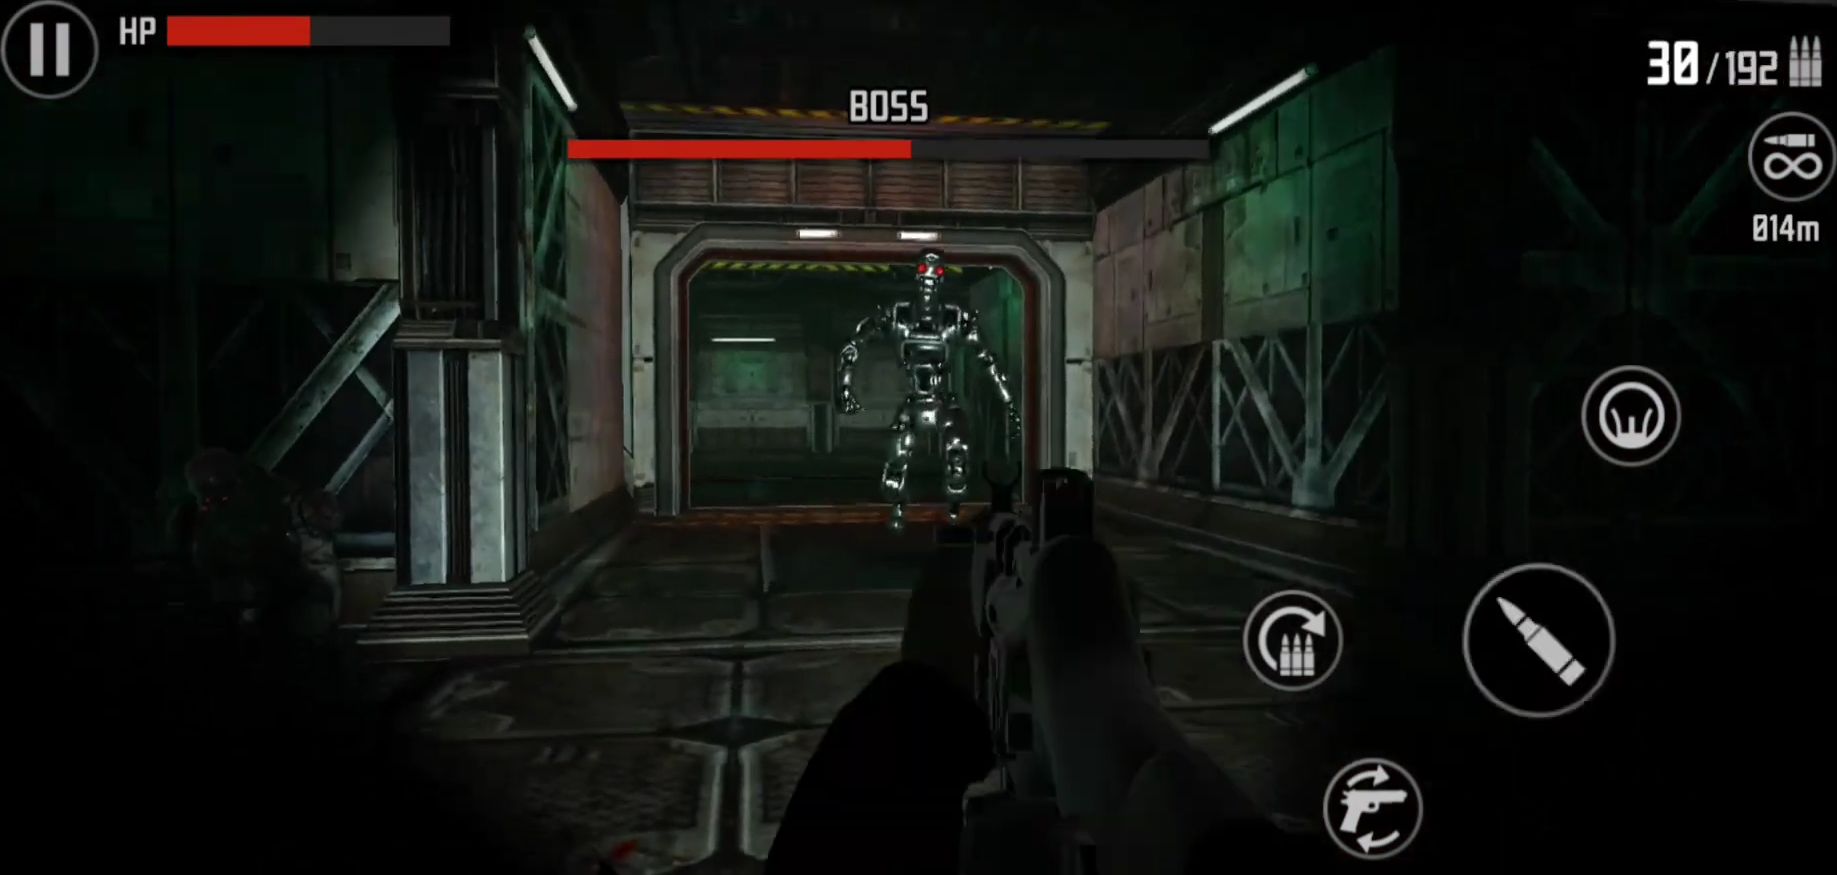 Last Hope 3: Sniper Zombie War - Android game screenshots.